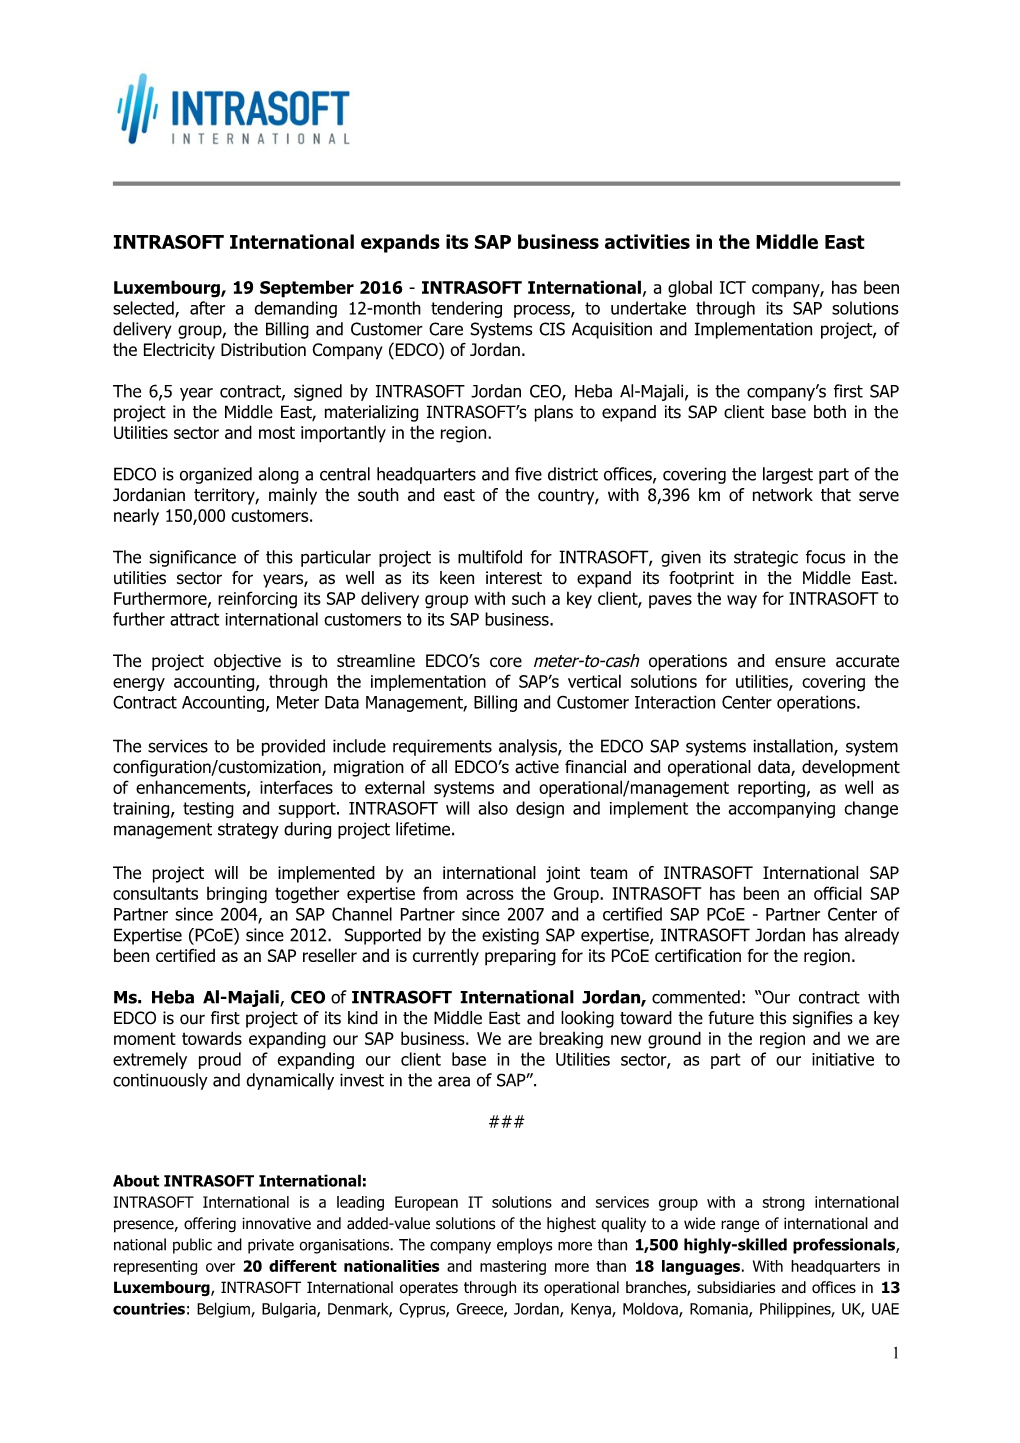 INTRASOFT International Expands Its SAP Business Activities in the Middle East